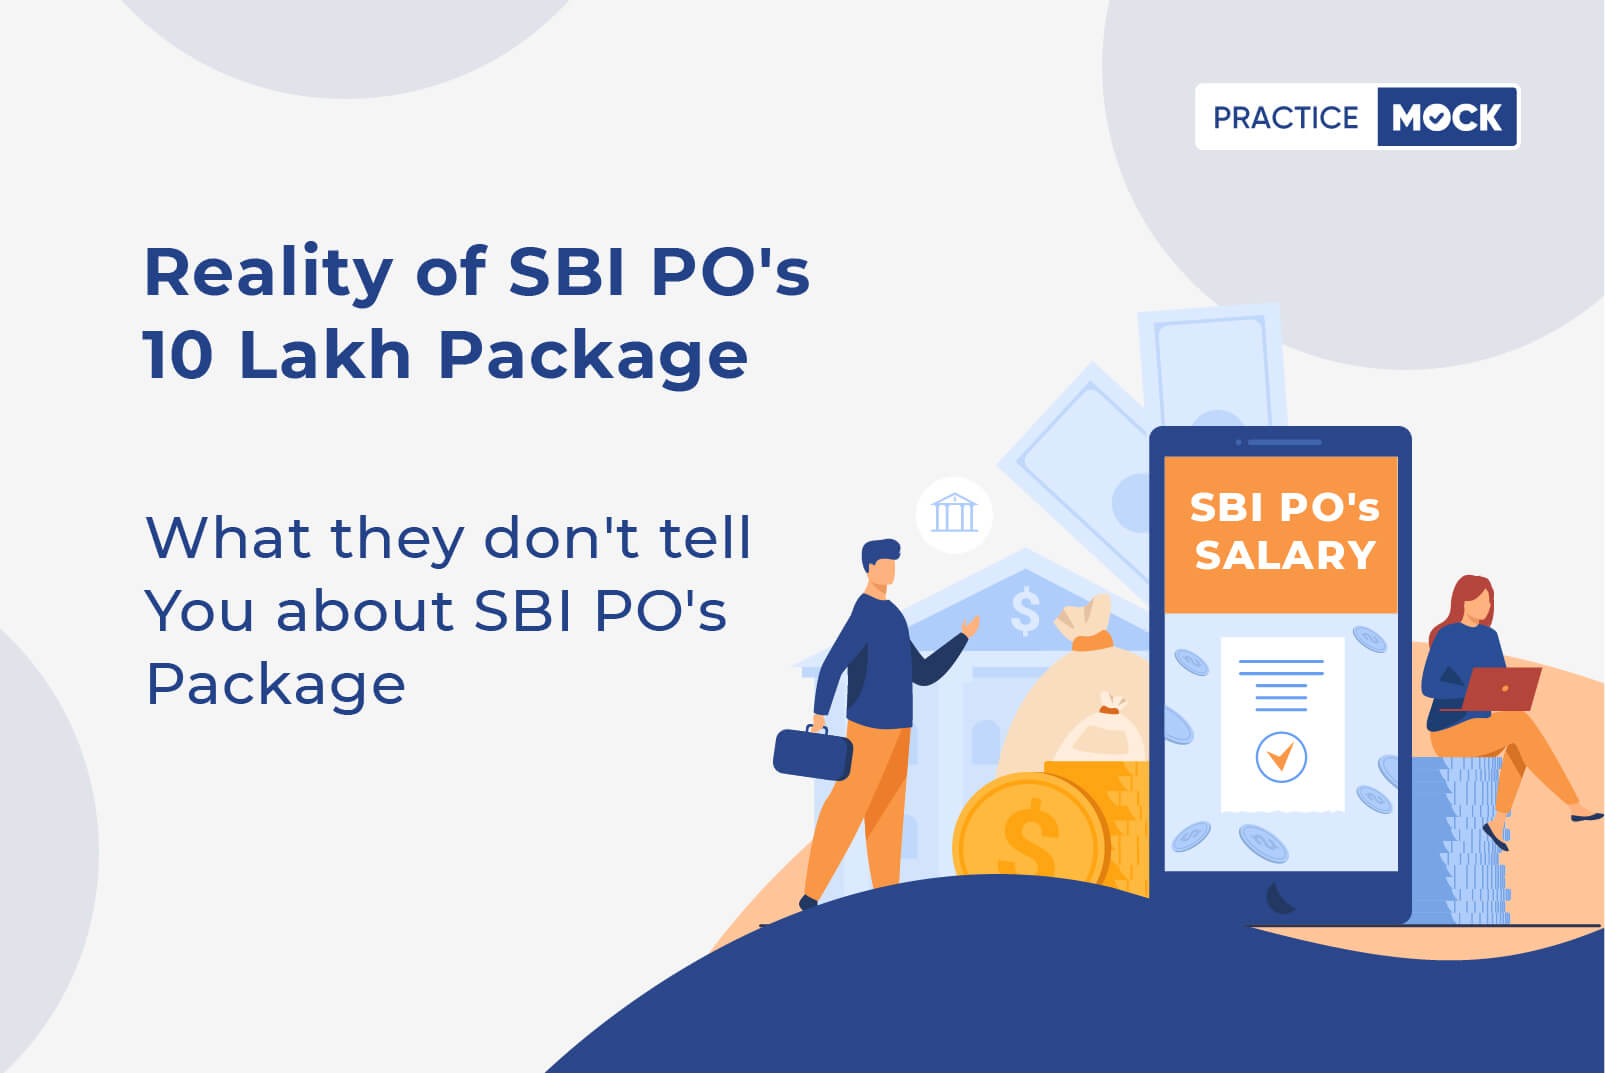 Reality of SBI PO's 10 Lakh Package